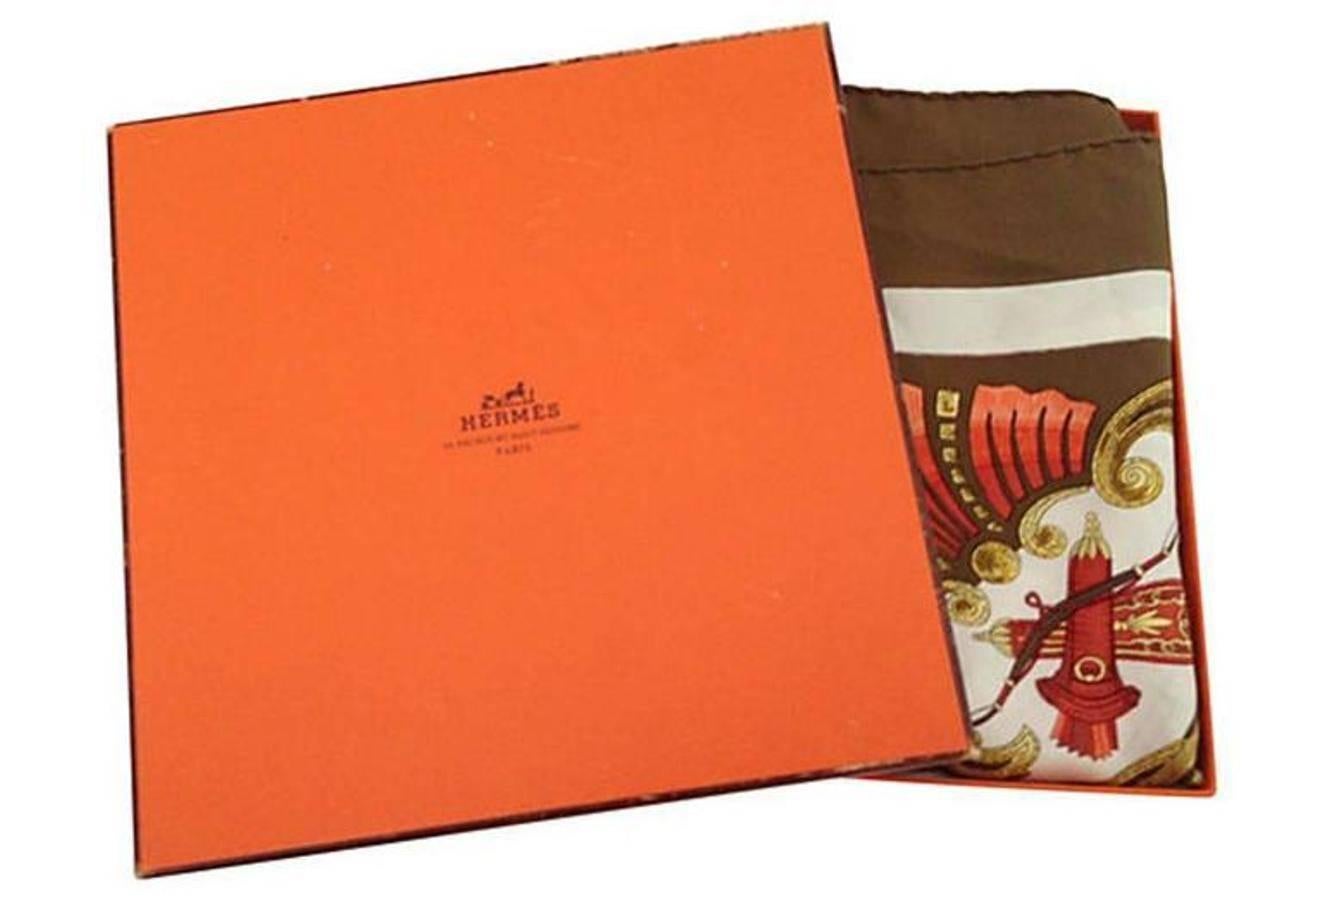 Hermès 100% silk scarf "Cheval Turc" scarf. Measures: 35" square. Designed for Hermes by, Christiane Vauzelles in 1969 This gorgeous equestrian theme scarf features a man with a turban leading a horse with a brown ground and coral,